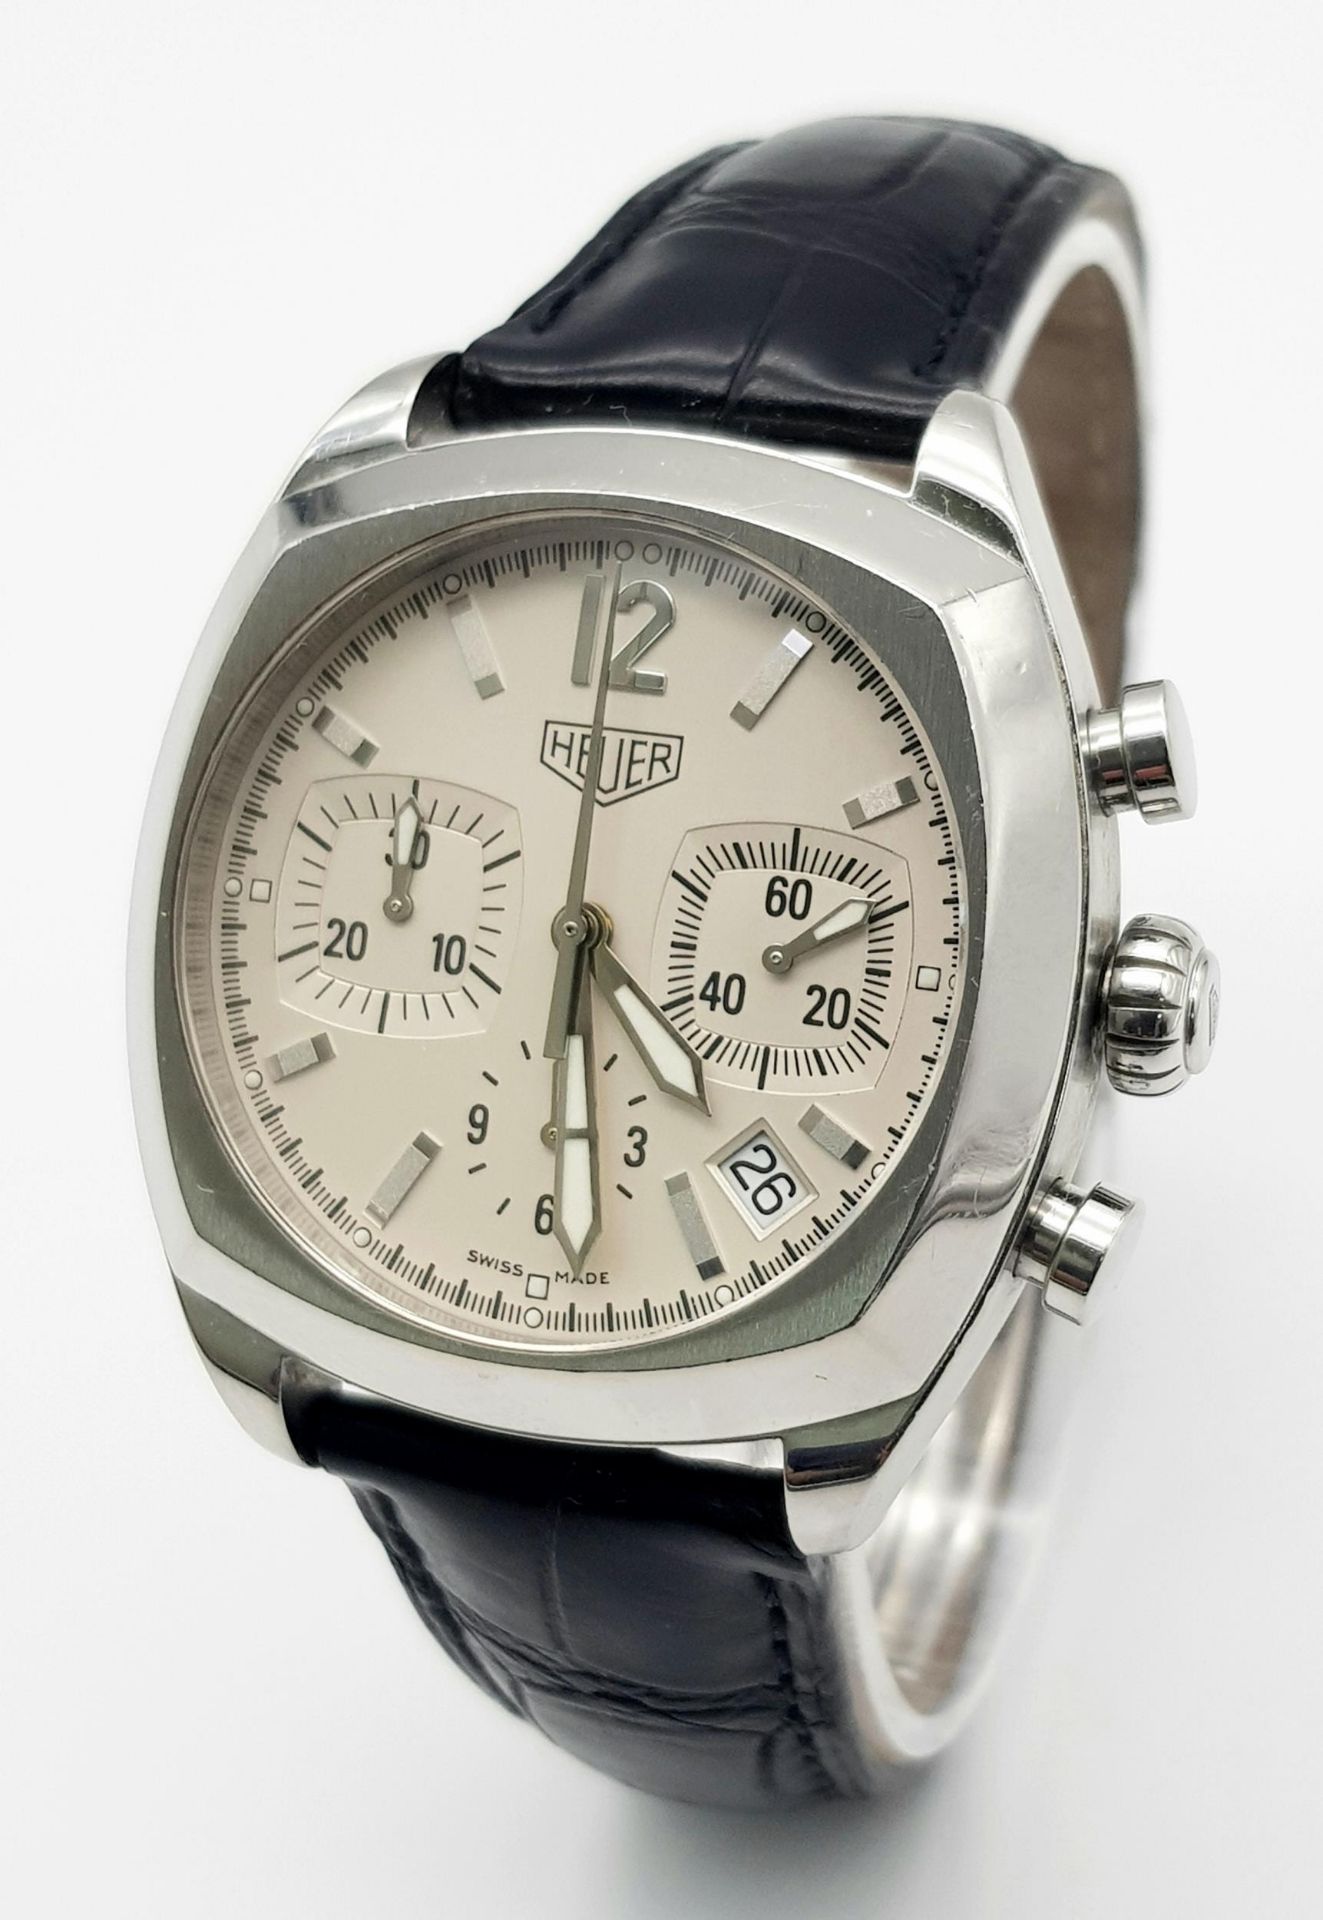 A Tag Heuer Monza Re-Edition Automatic Chronograph Watch. Model CR2111. Black Croc Leather Tag - Image 2 of 7